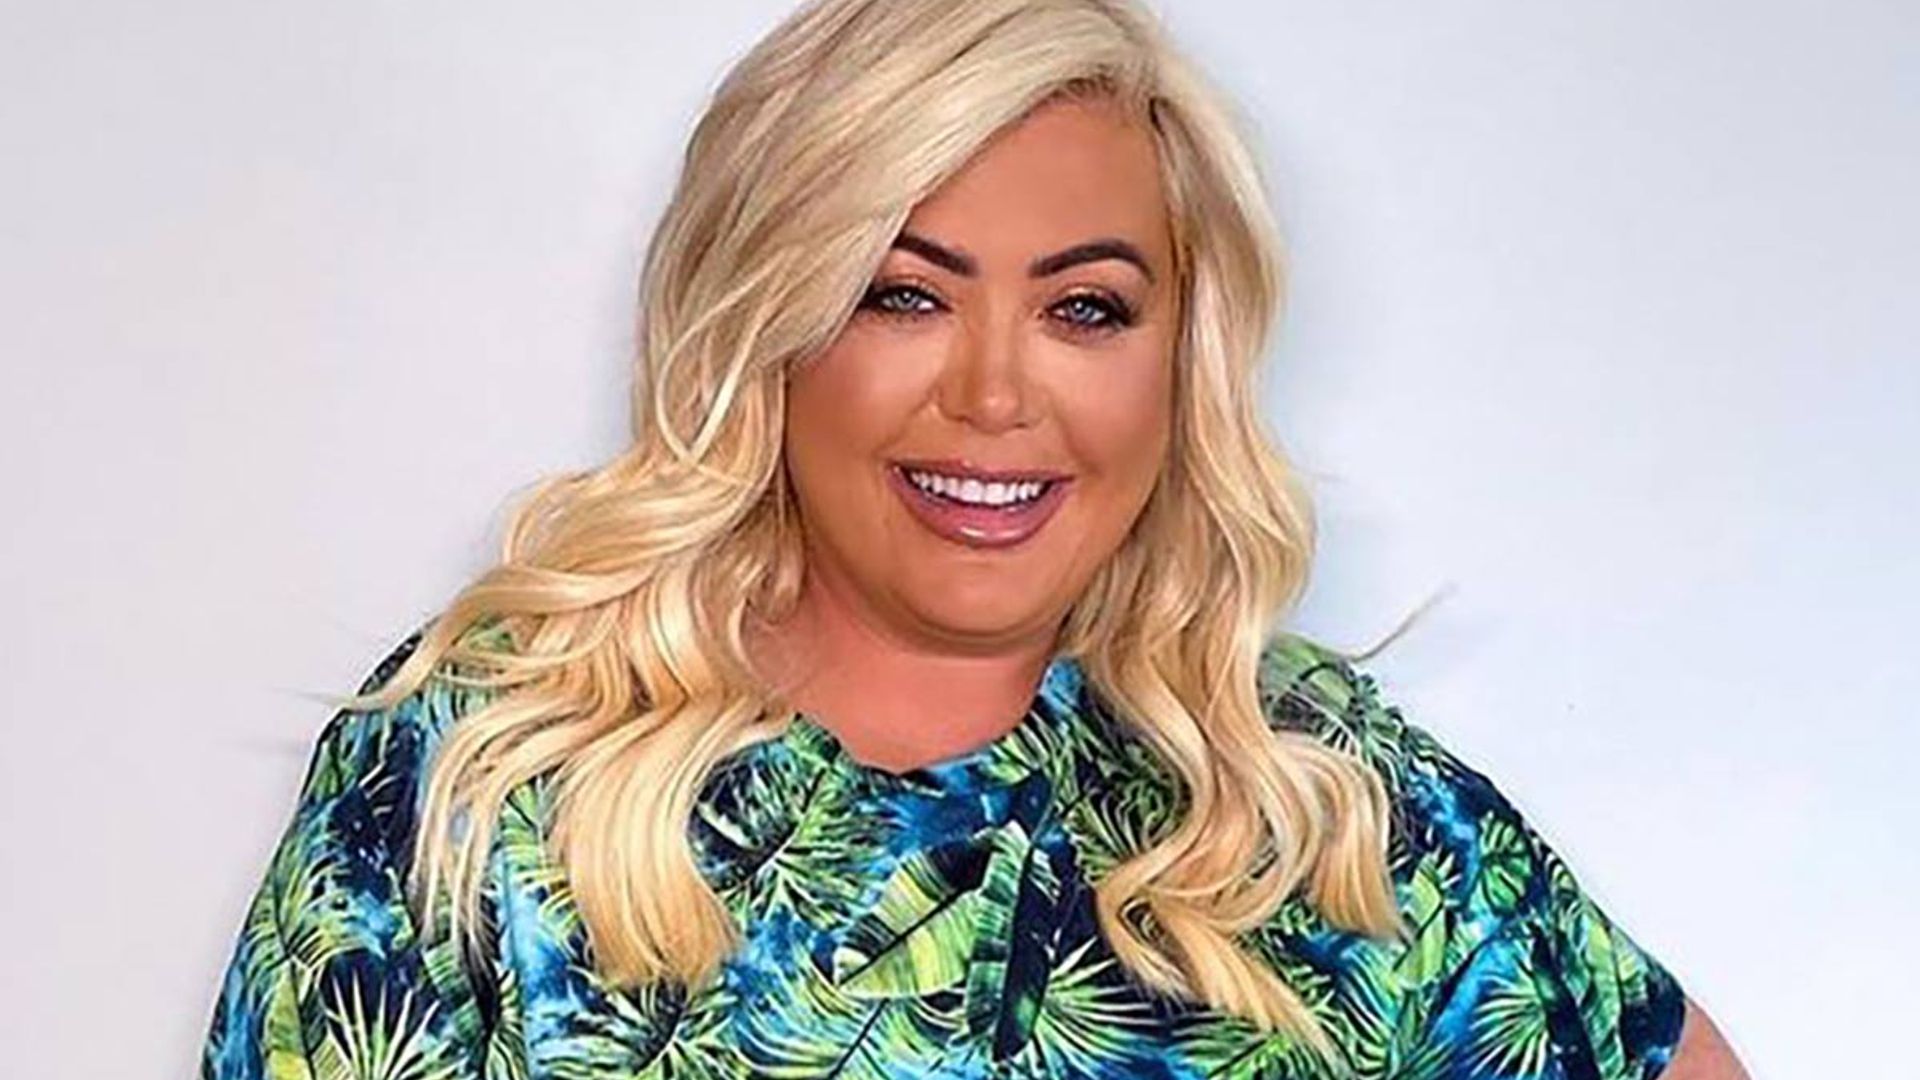 gemma collins weight loss pic